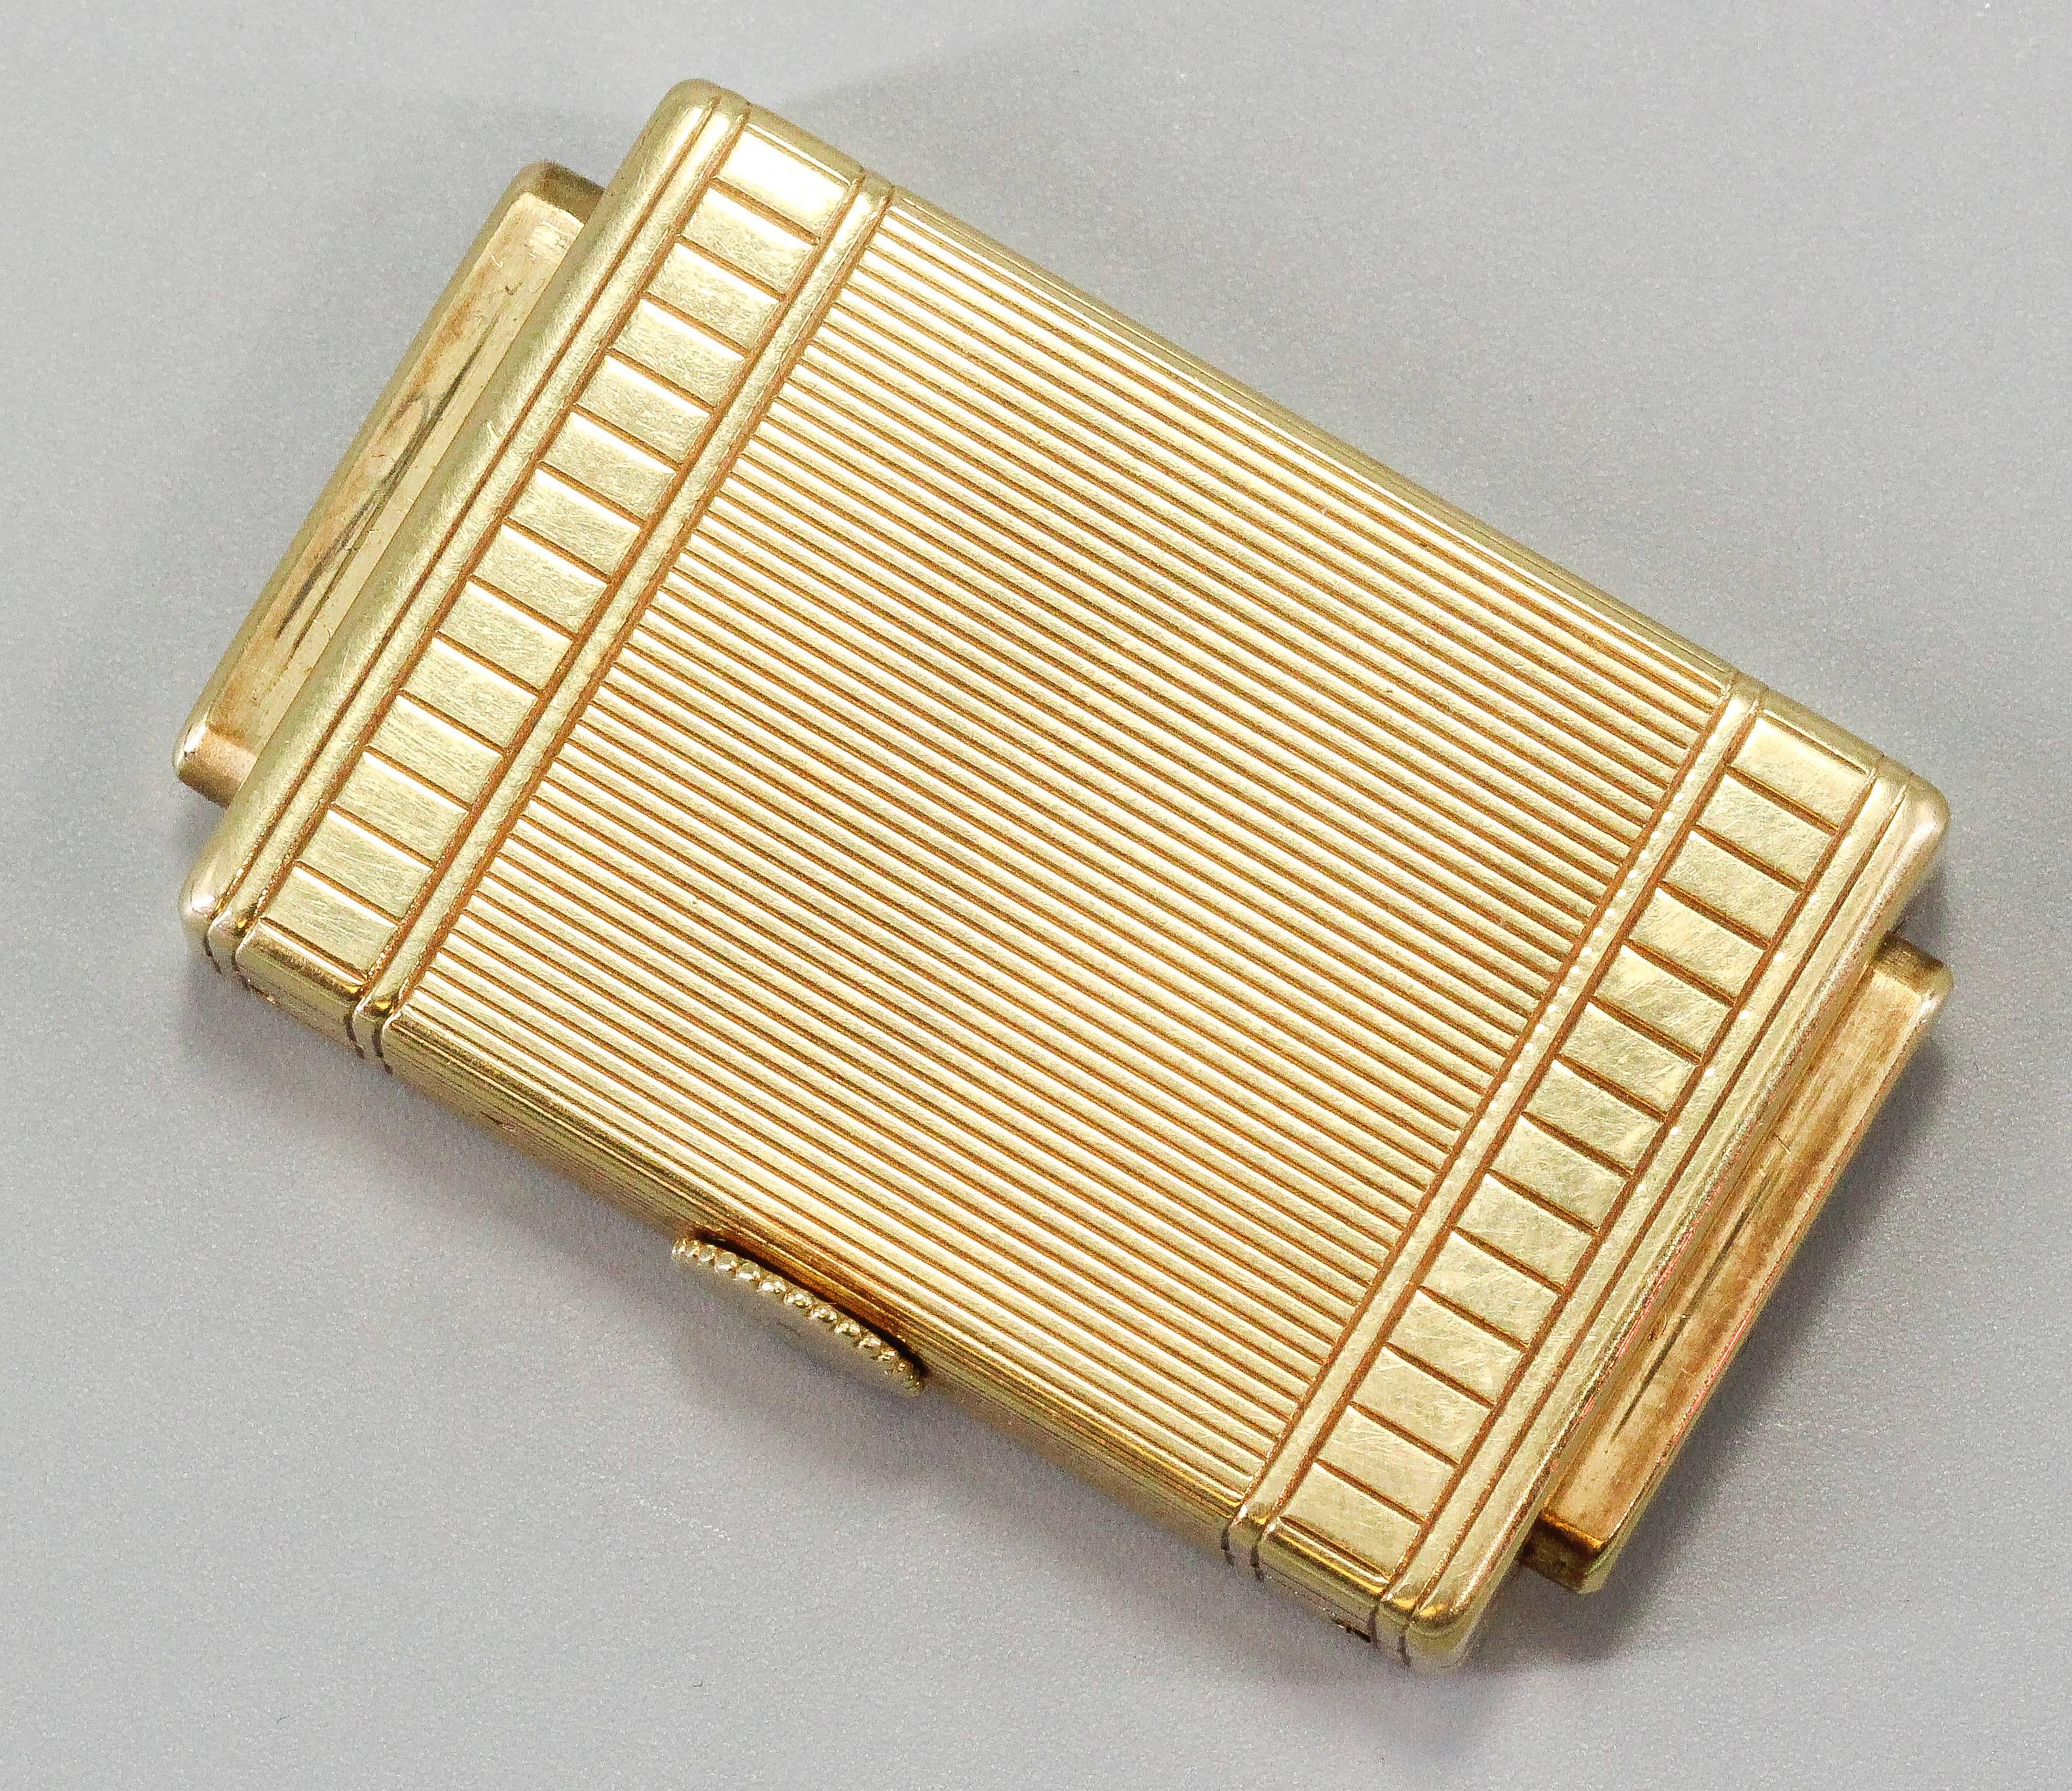 Rare and unusual 18K yellow gold traveling shutter watch by Cartier, circa 1920s. Features a shutter aperture mechanism that reveals the Cartier dial with roman numberals. Mechanical winding movement made by EWC (European Watch & Clock Company).